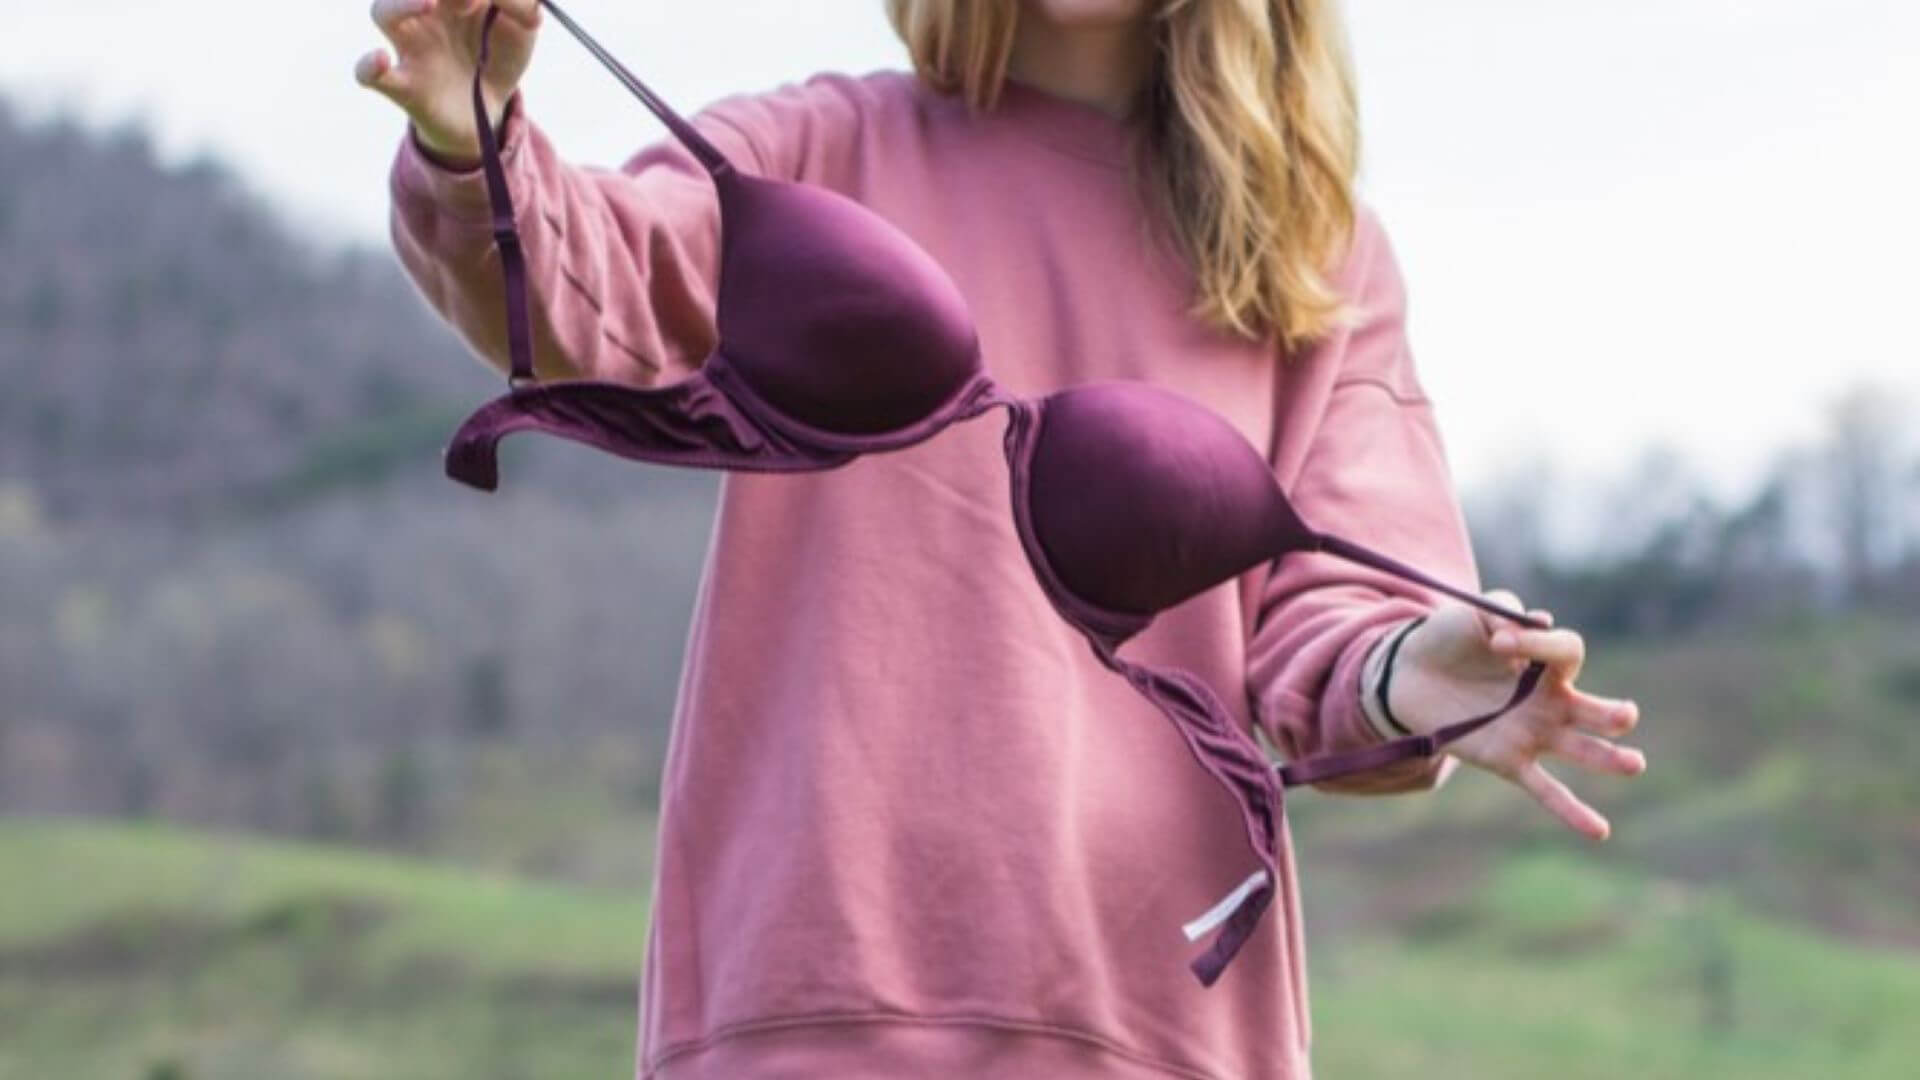 Free The Girls uses donated bras to help survivors of sex trafficking